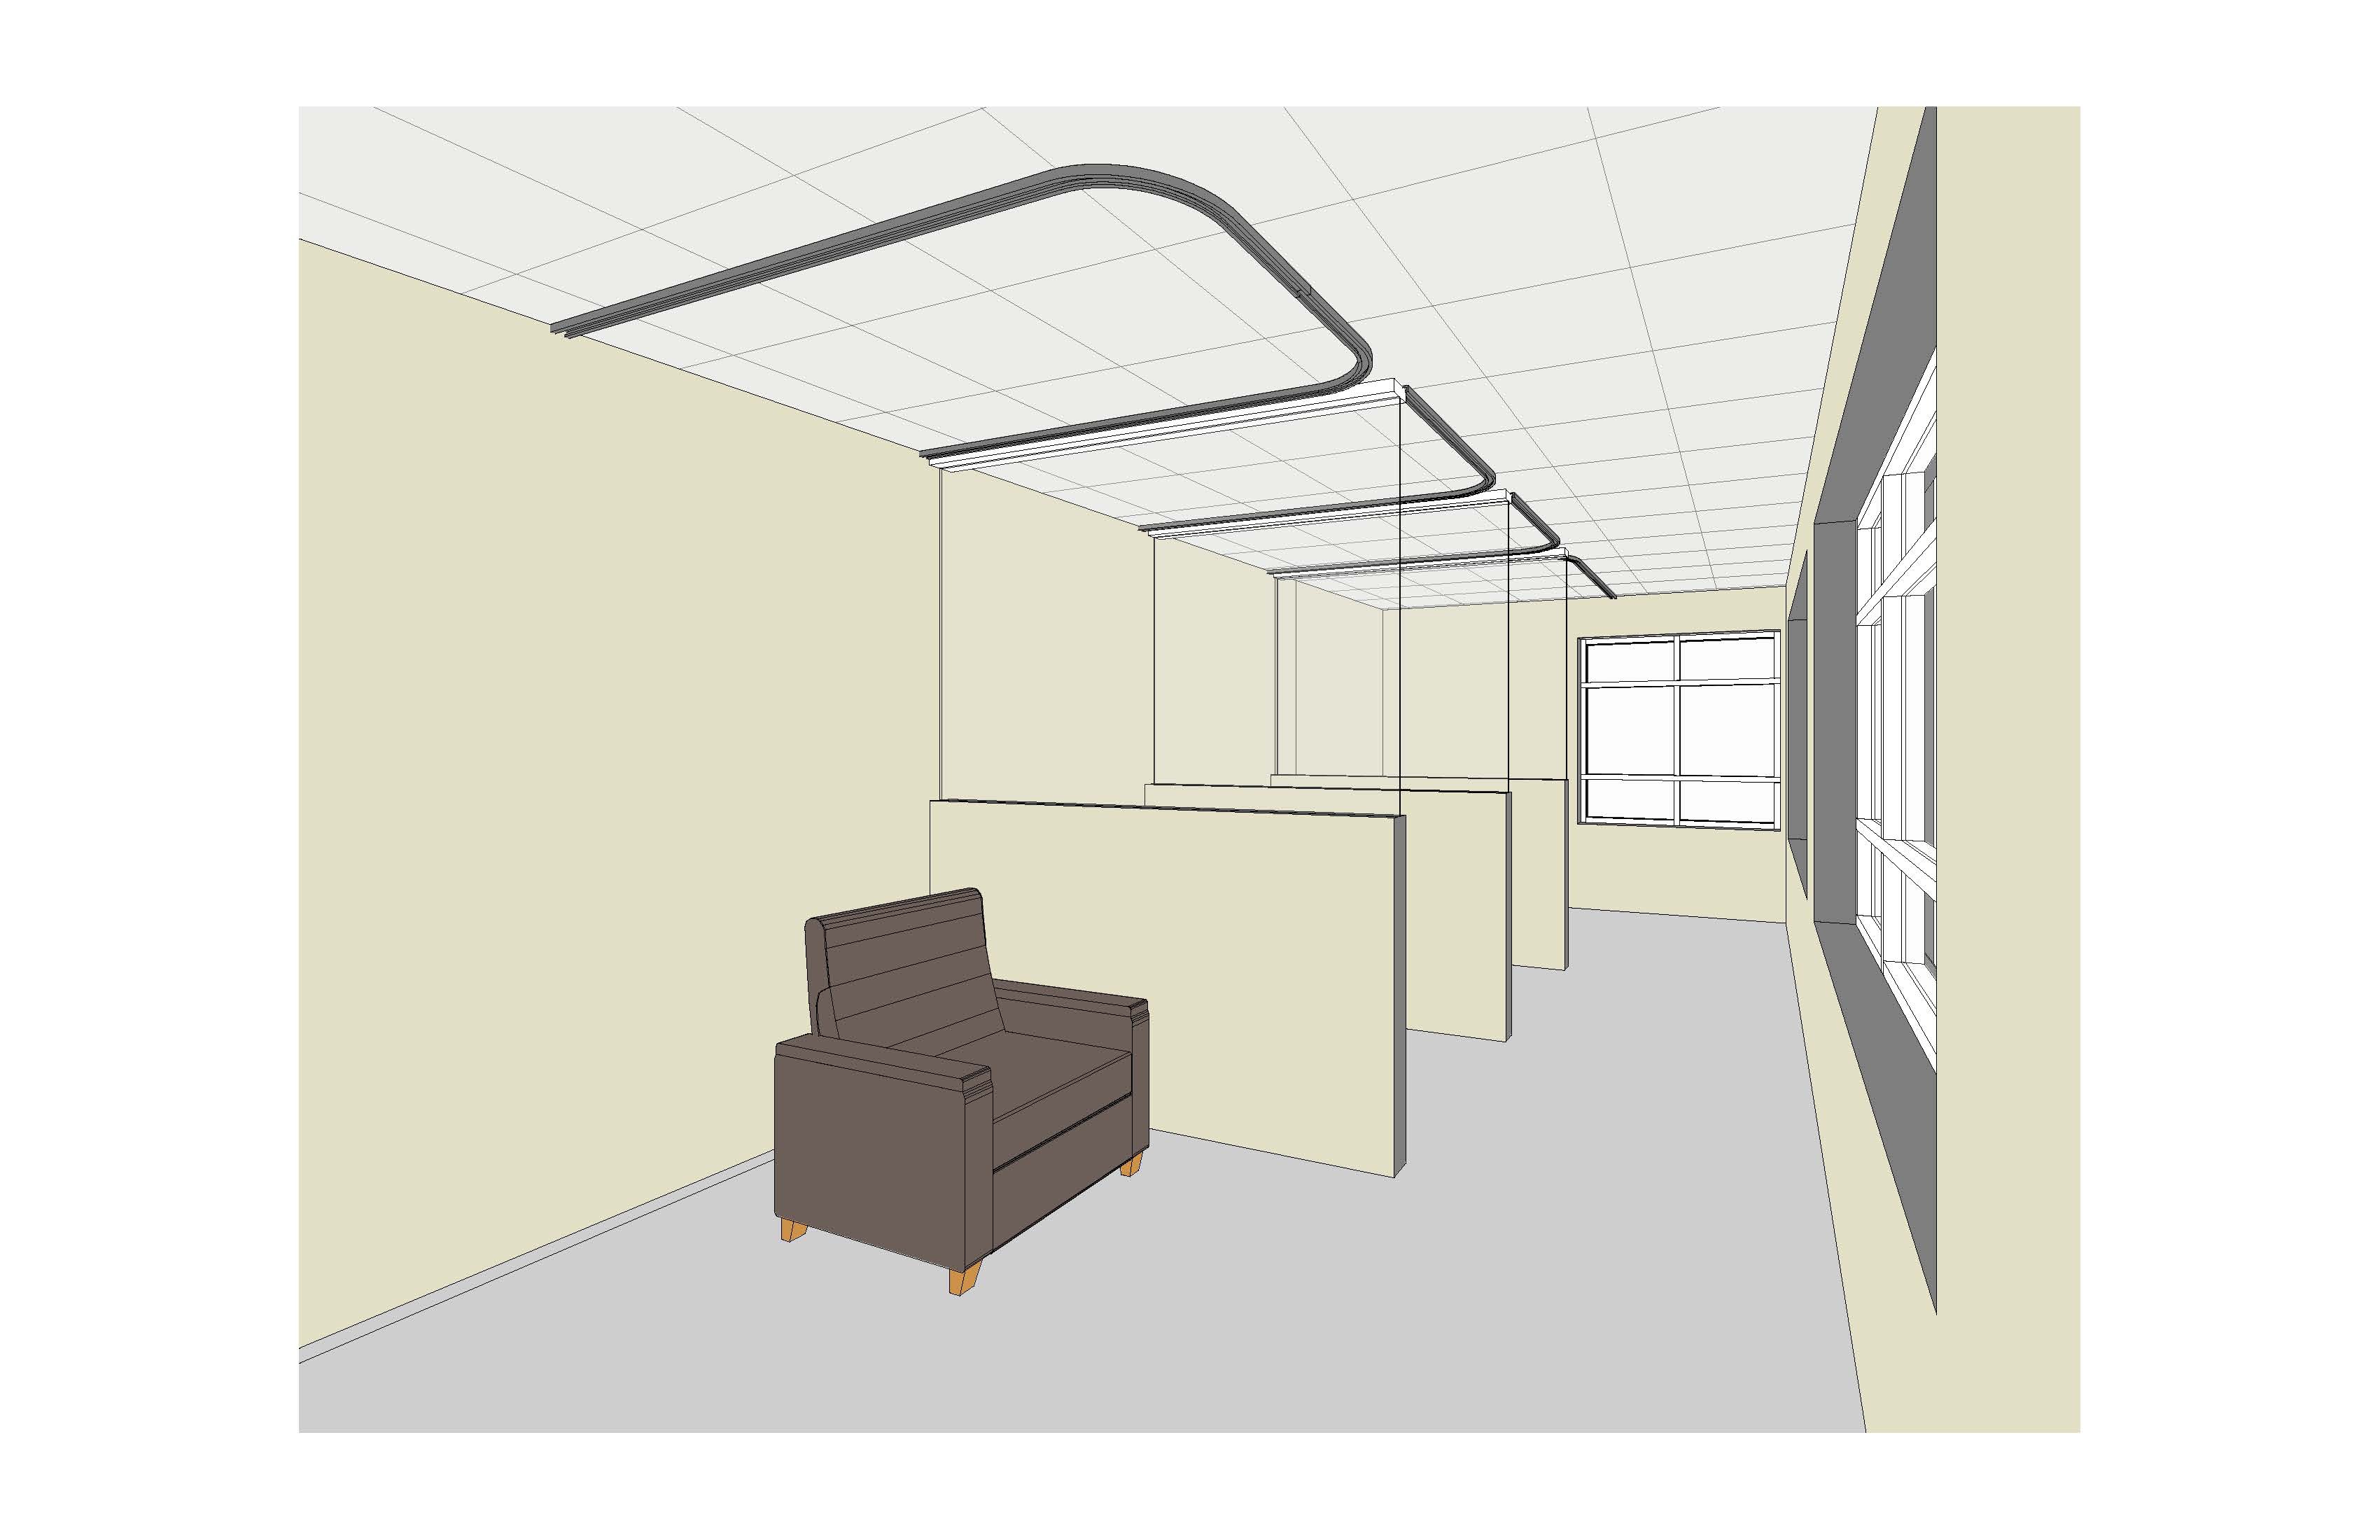 CHCS moves forward with infusion room project